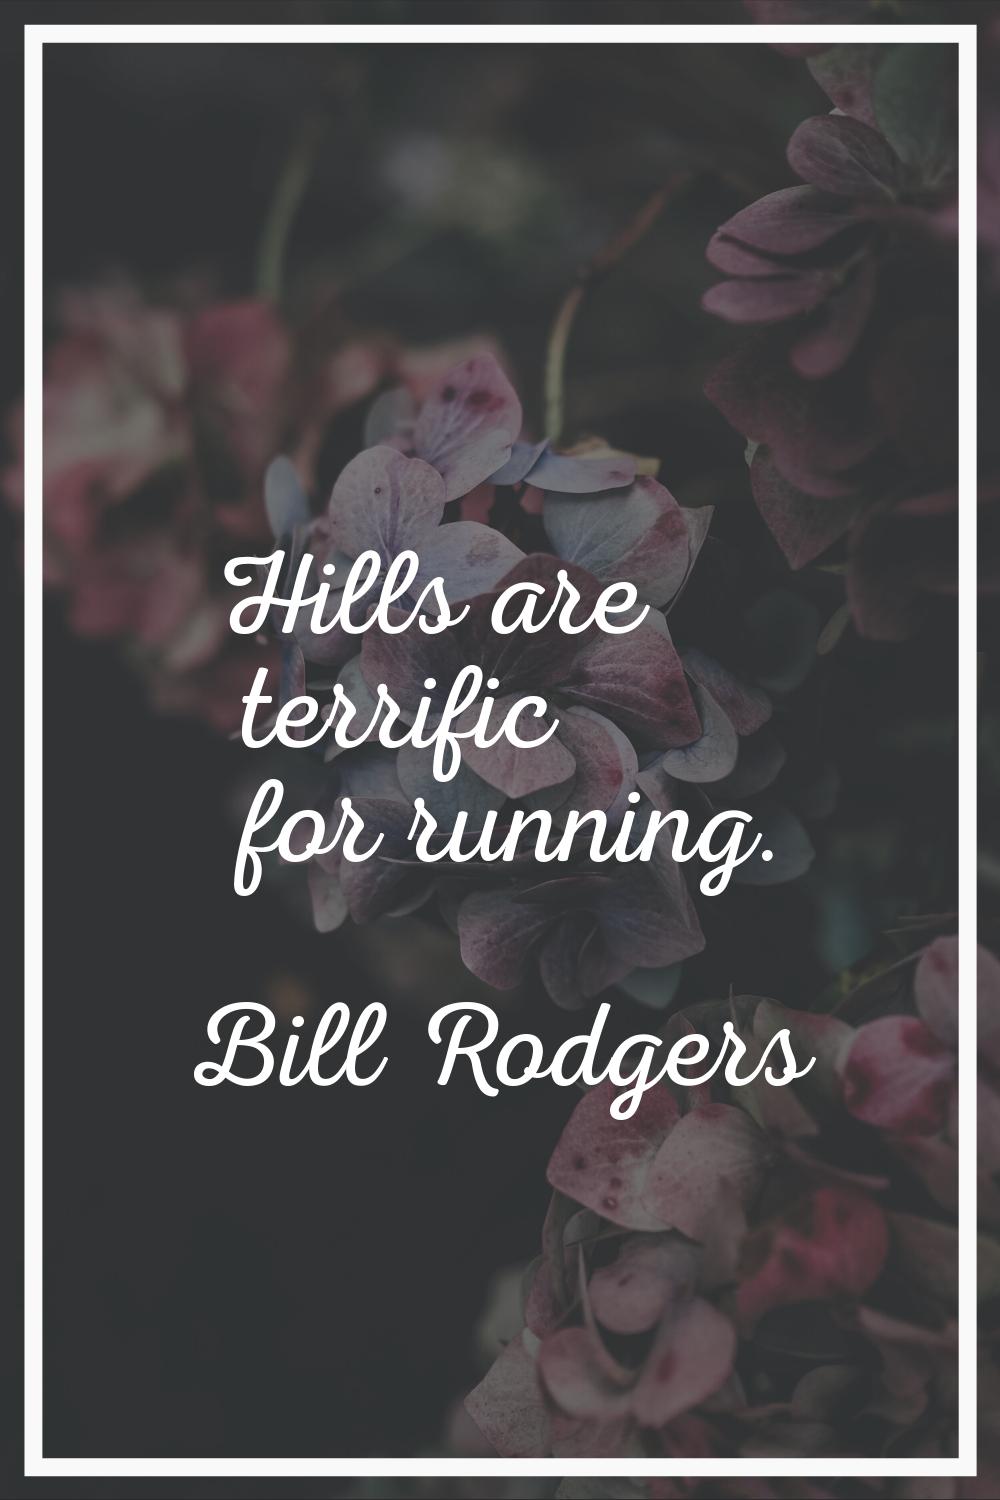 Hills are terrific for running.